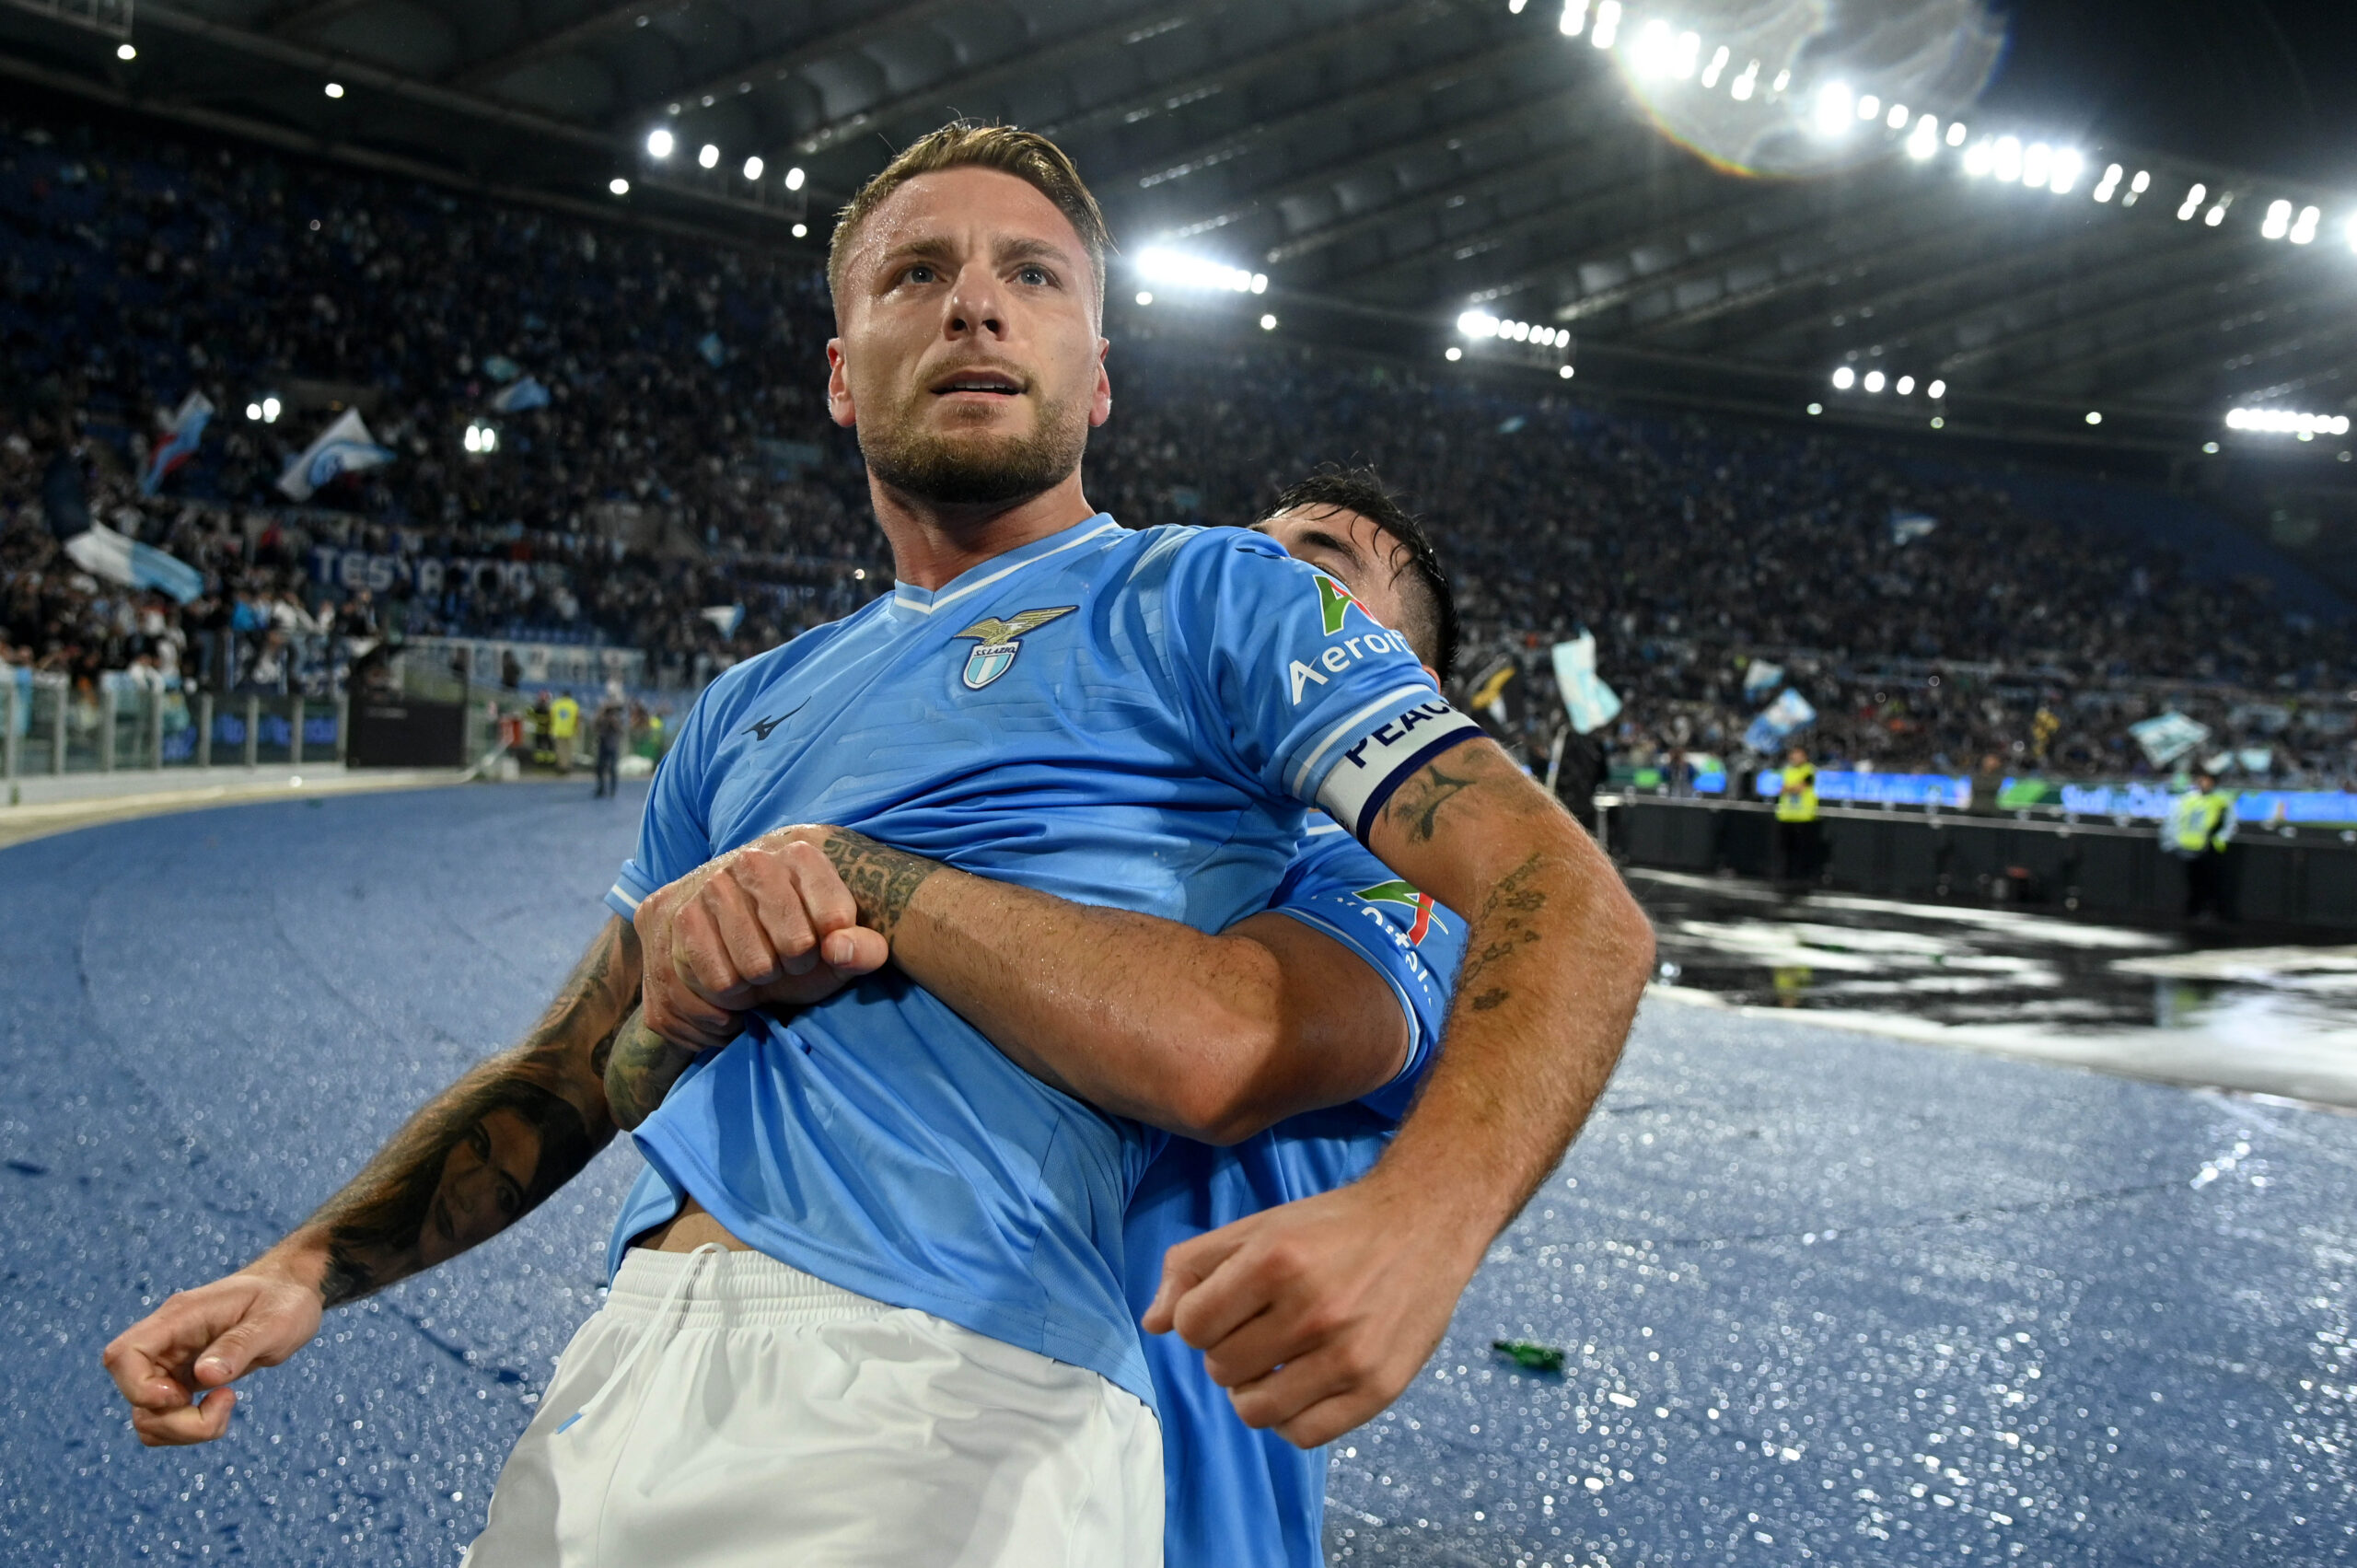 Lazio and Ciro Immobile are in Saudi Arabia for the Supercoppa, where they’ll debut against Inter in the semi-final on Friday.